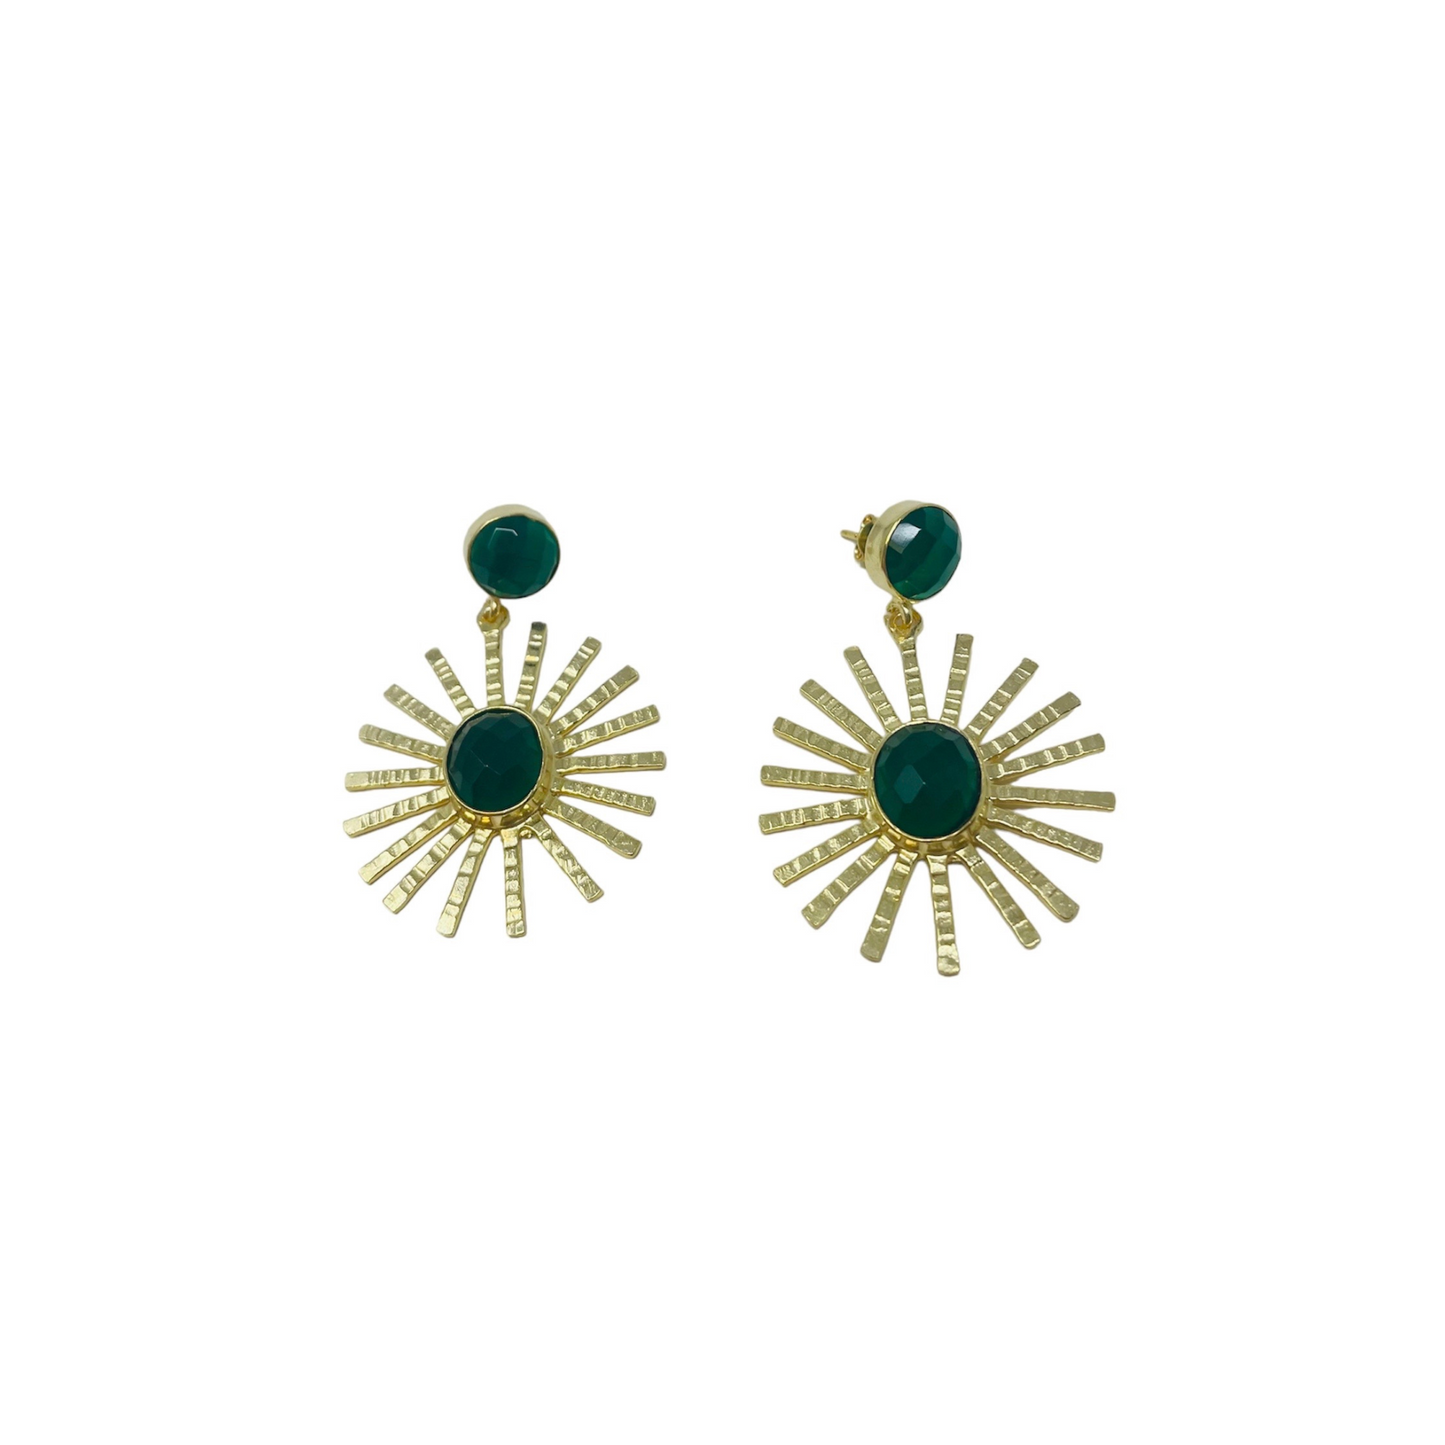 Gold Starburst Earrings with Green Stones